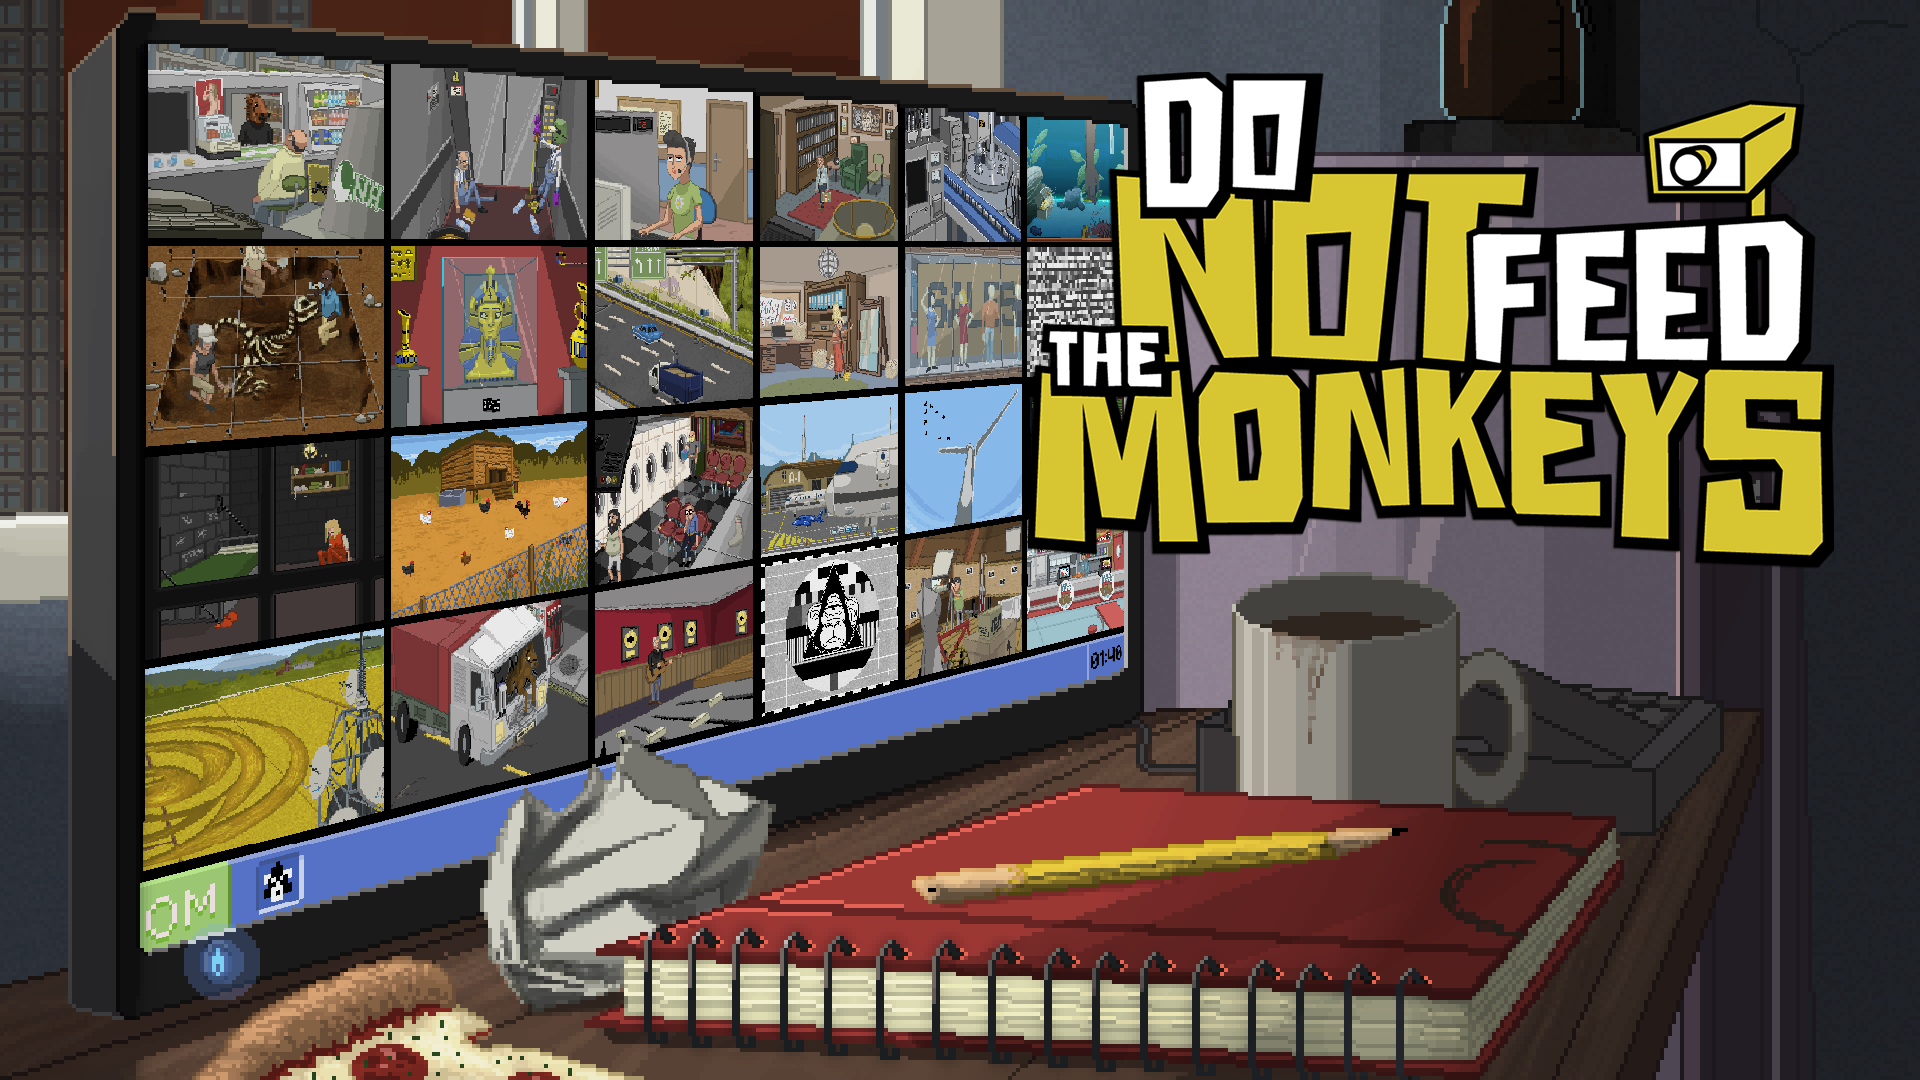 Do Not Feed the Monkeys, an Award Winning ‘Digital Voyeur Simulator’ Launched their  ‘Closed Beta’ today, Set to Fully Release on Steam Early Q4